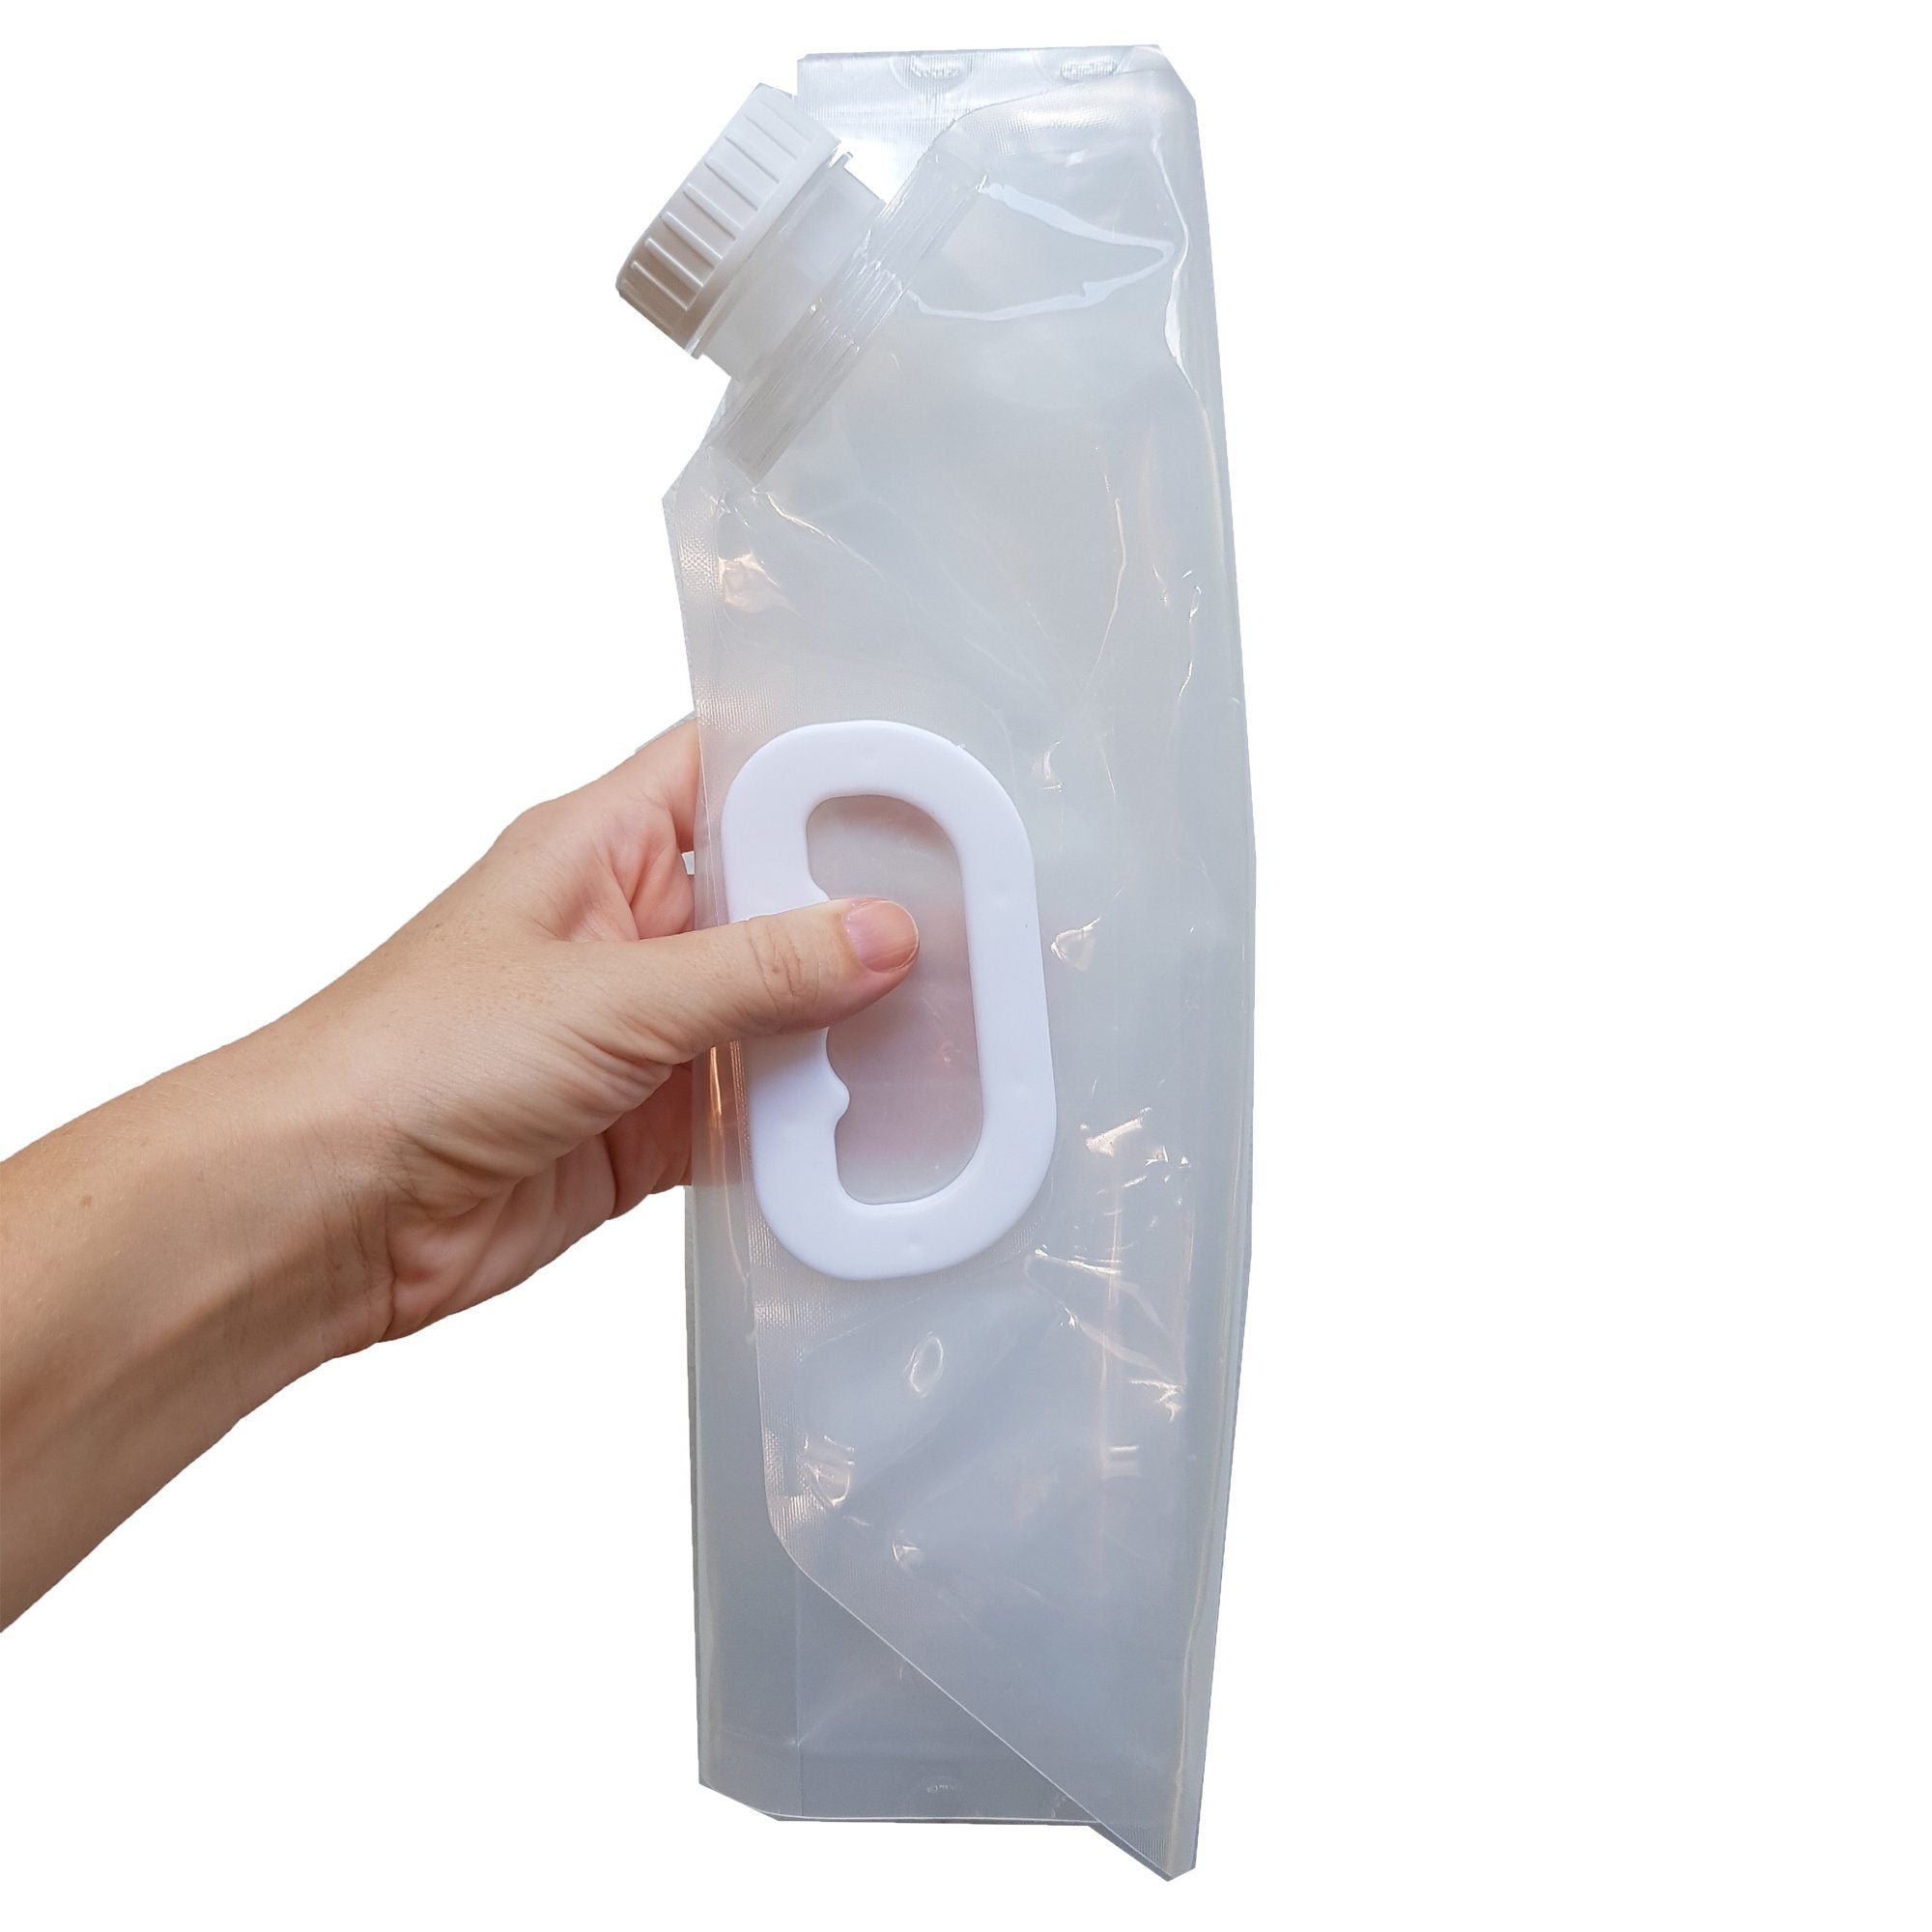 Festival Camping 5L Water Bottle HydraMate